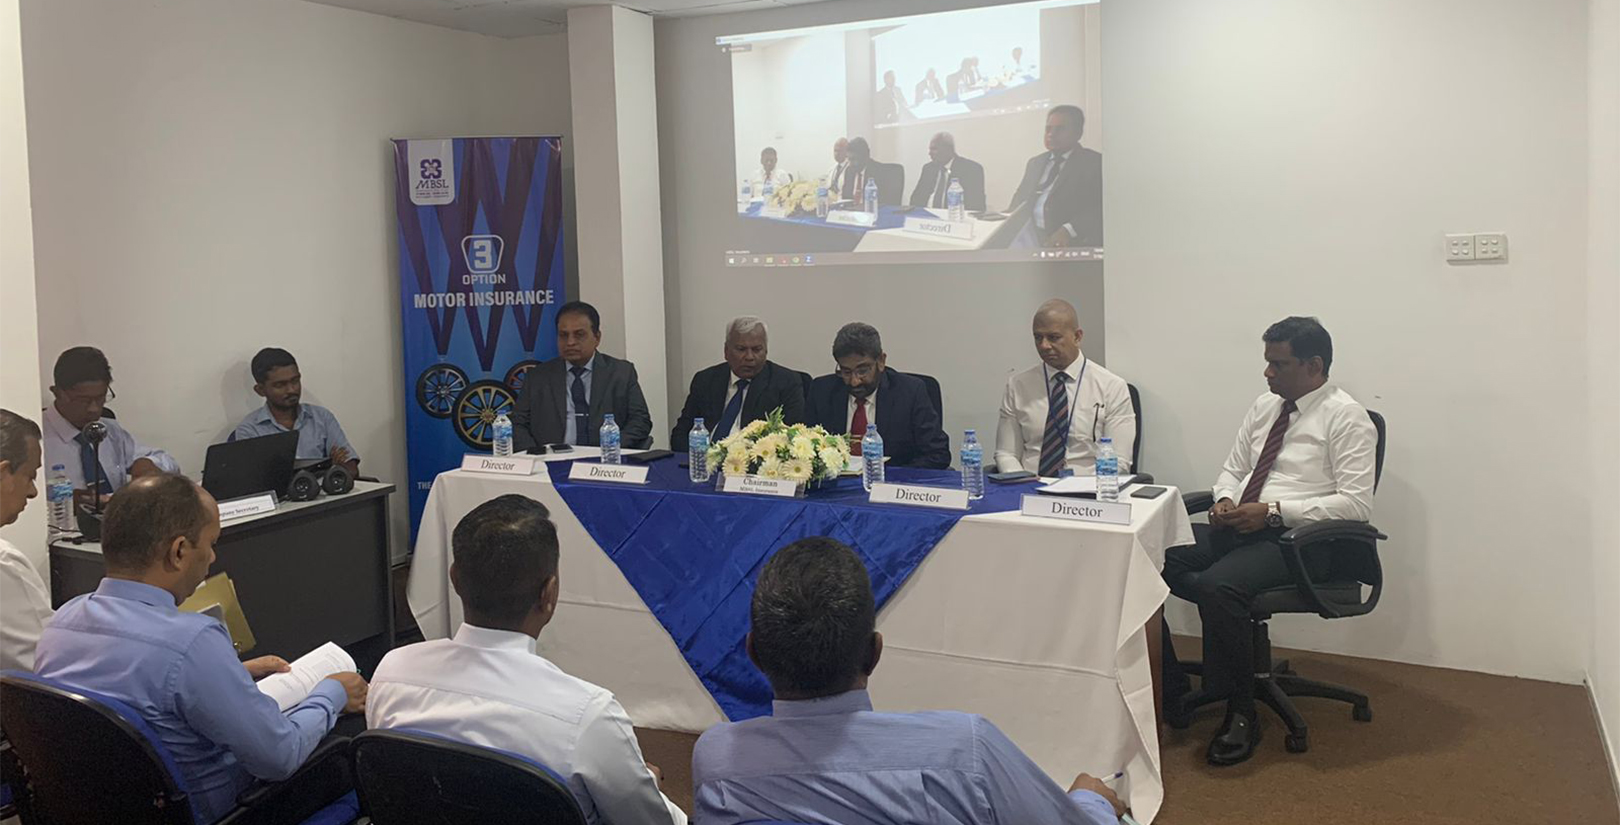 MBSL Insurance's 18th Annual General Meeting Concludes Successfully